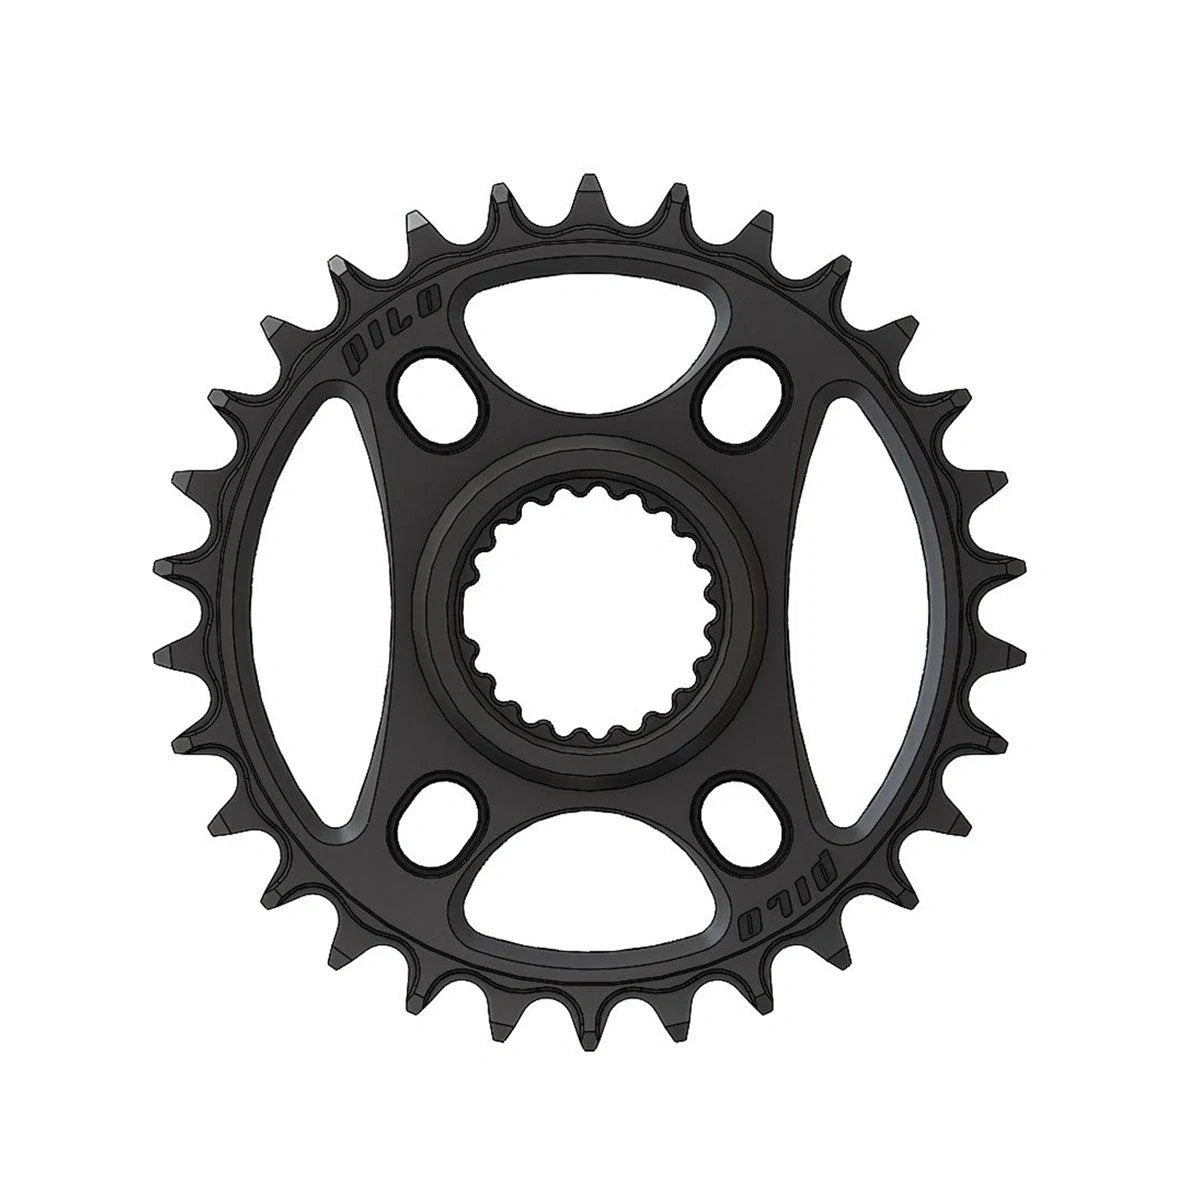 Pilo 30T Chainring For Shimano Cranks - Replacement Chain Rings